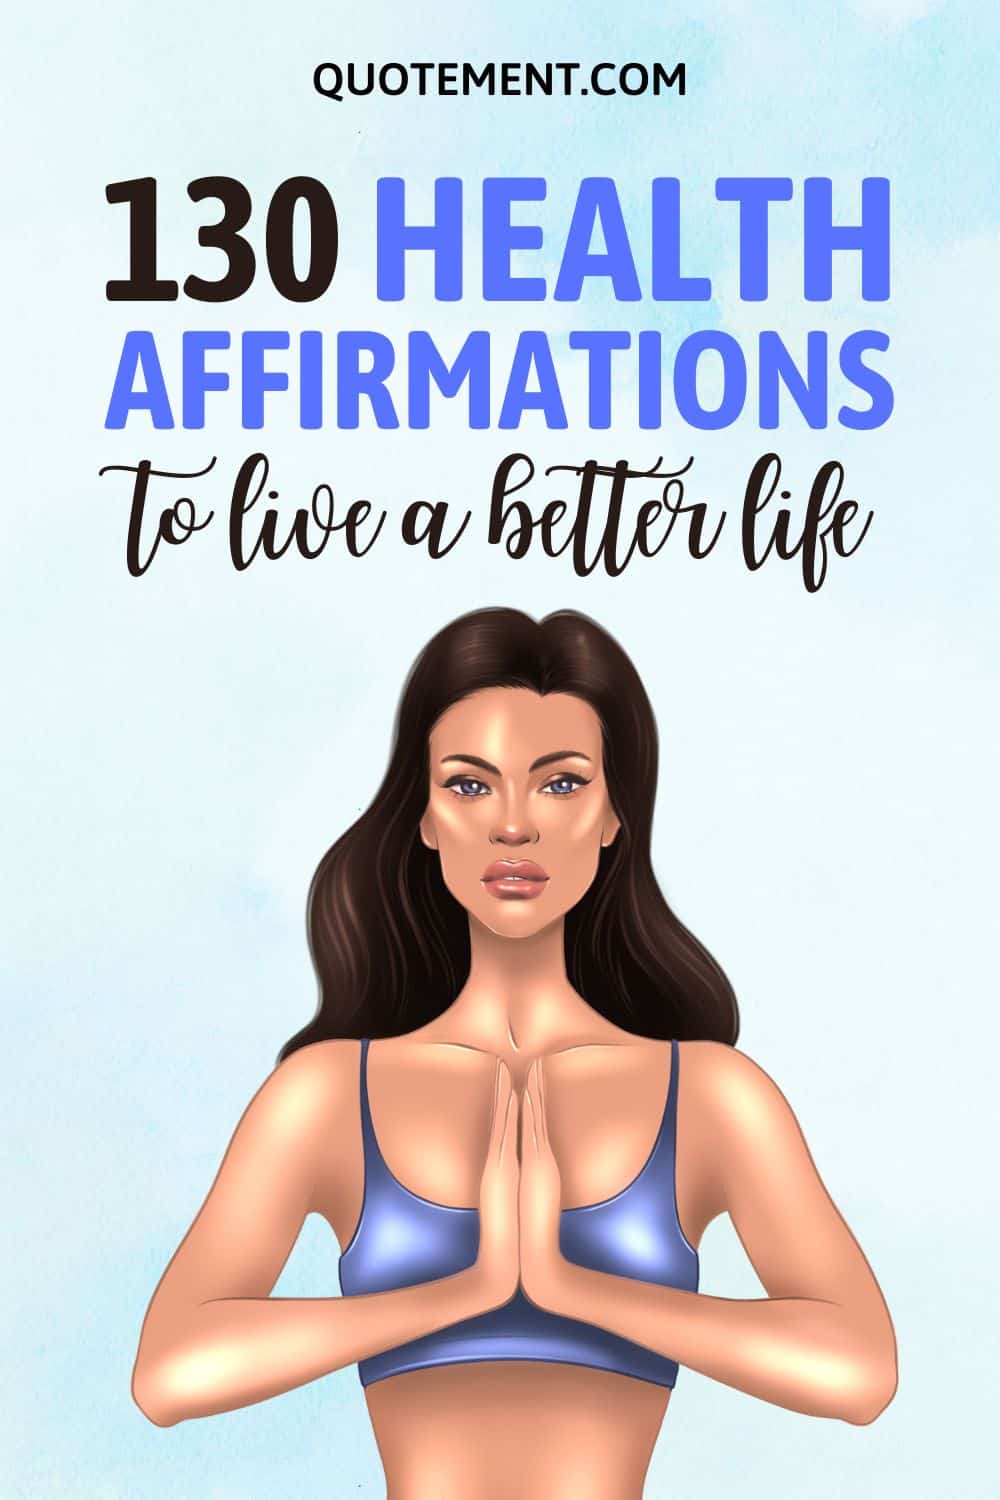 130 Powerful Health Affirmations For A Healthy Lifestyle